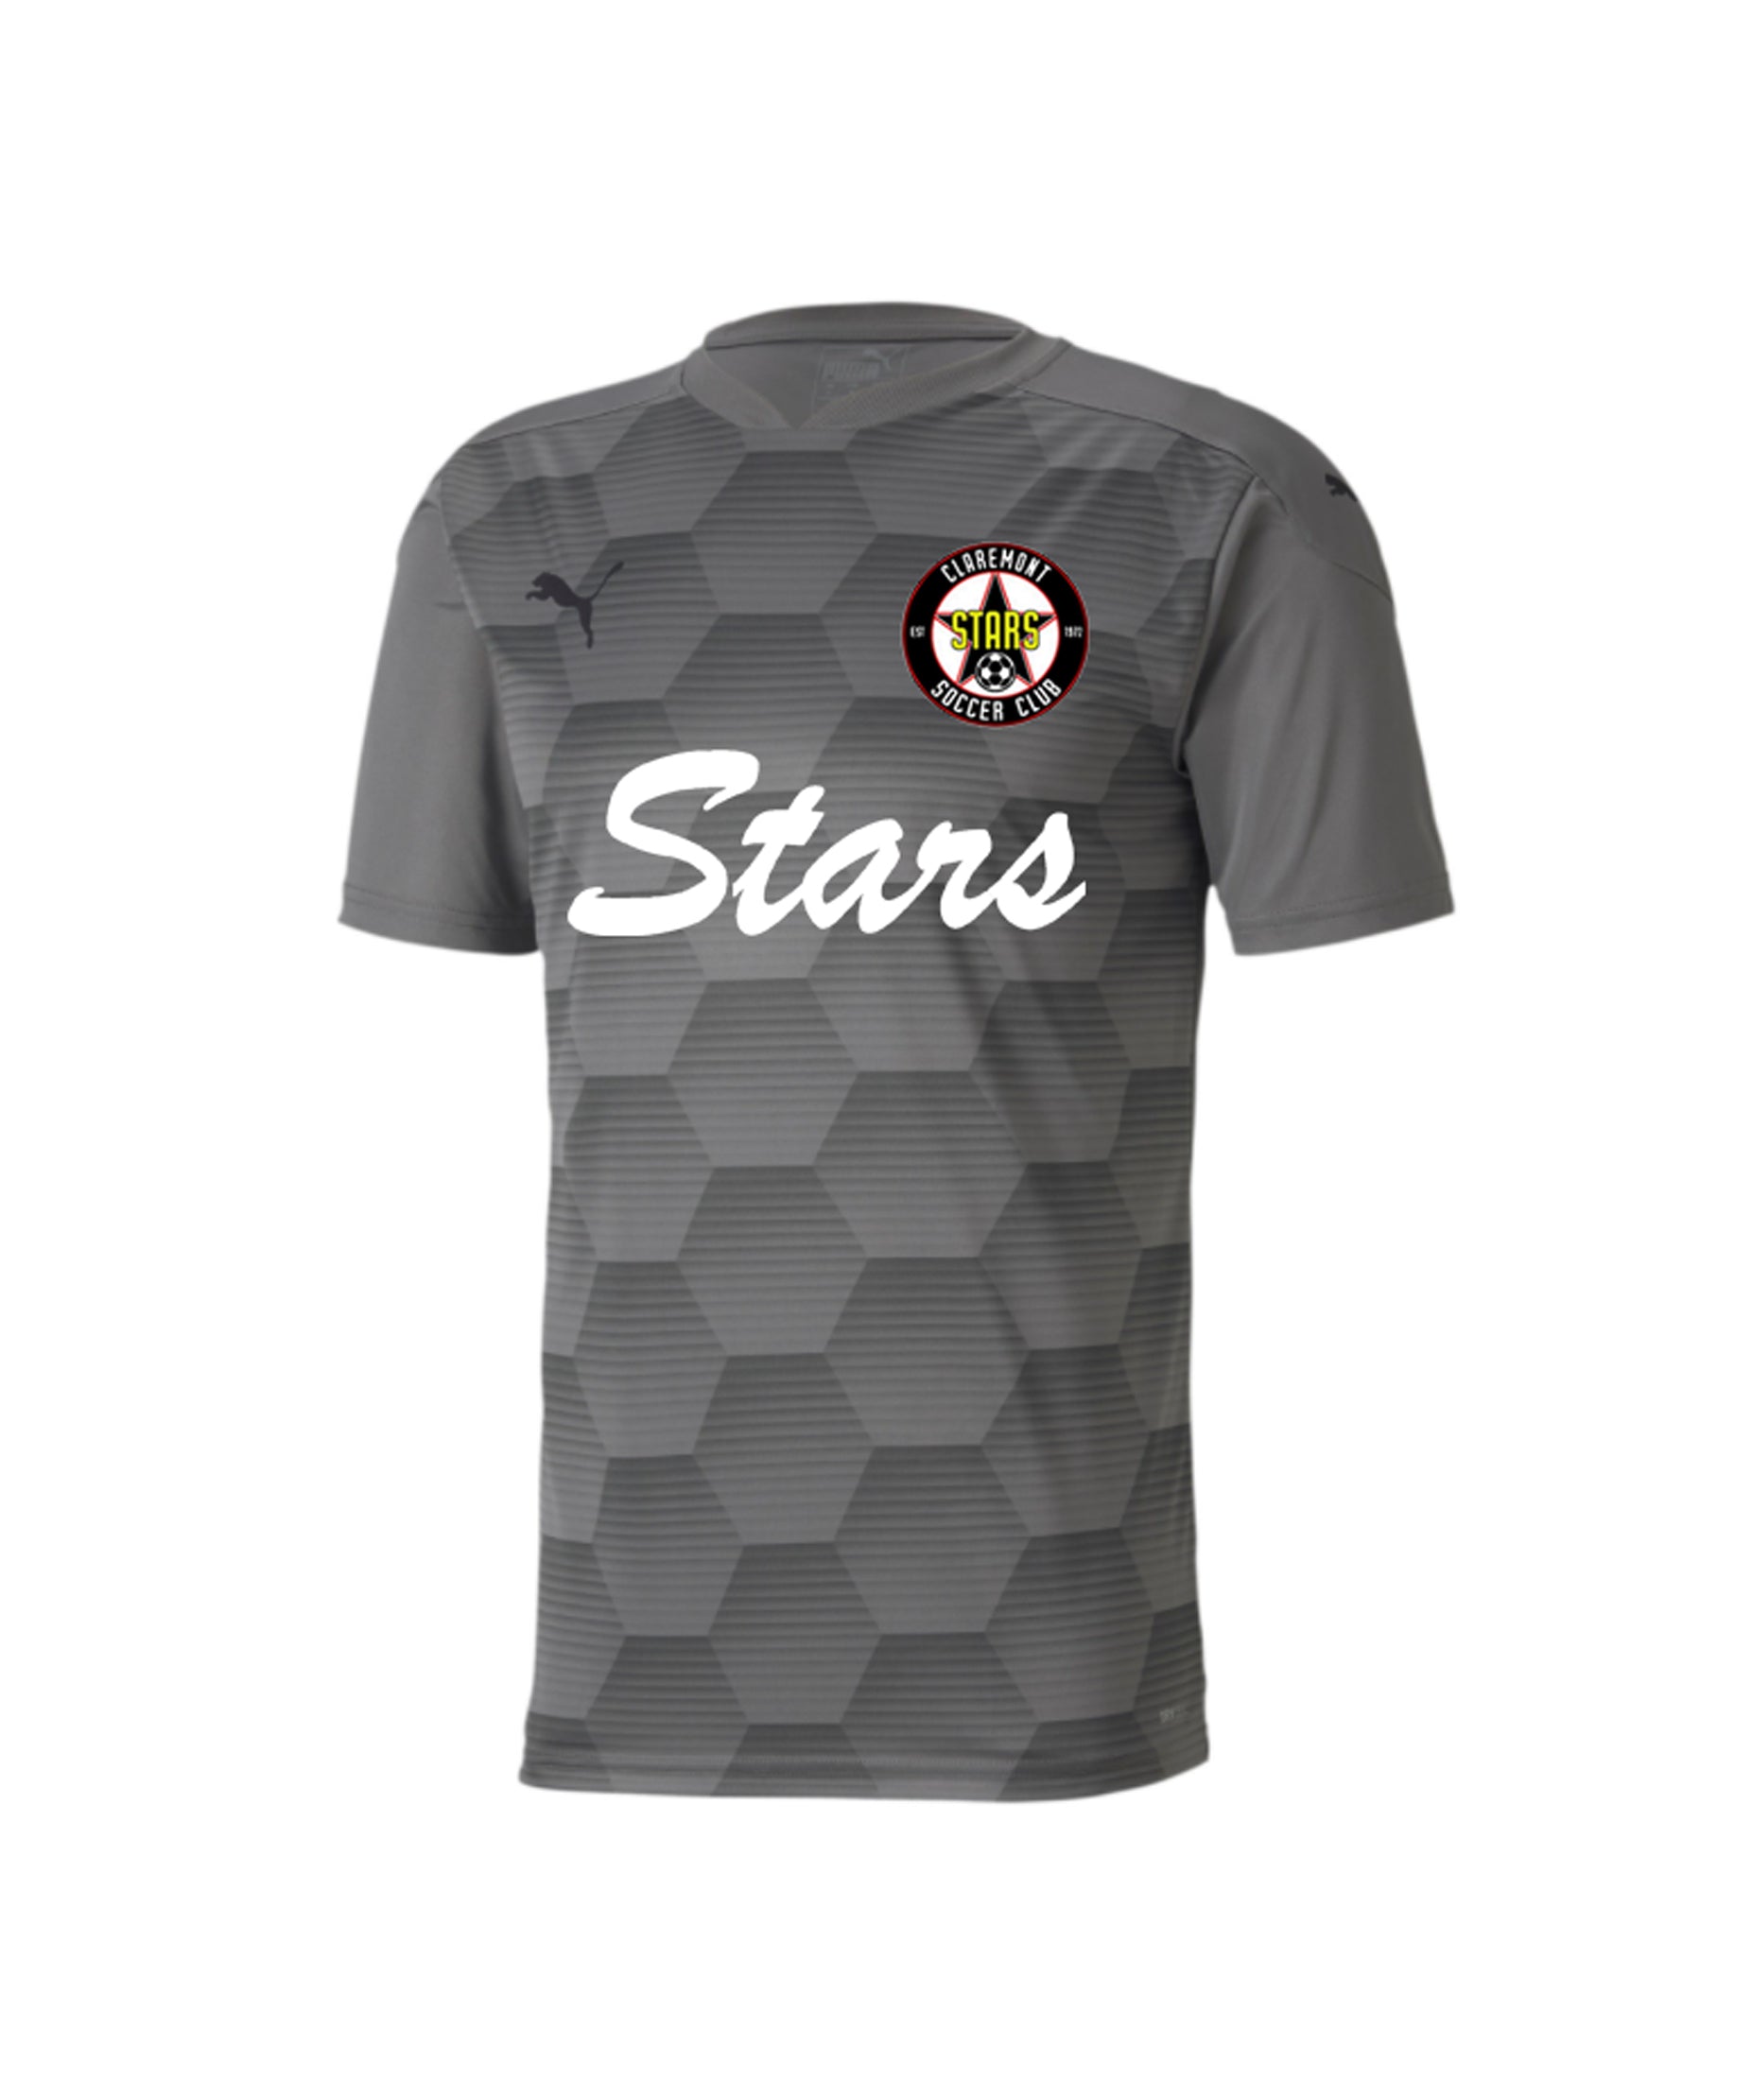 CLAREMONT STARS YOUTH JERSEY - PUMA TEAM FINAL 21 GRAPHIC